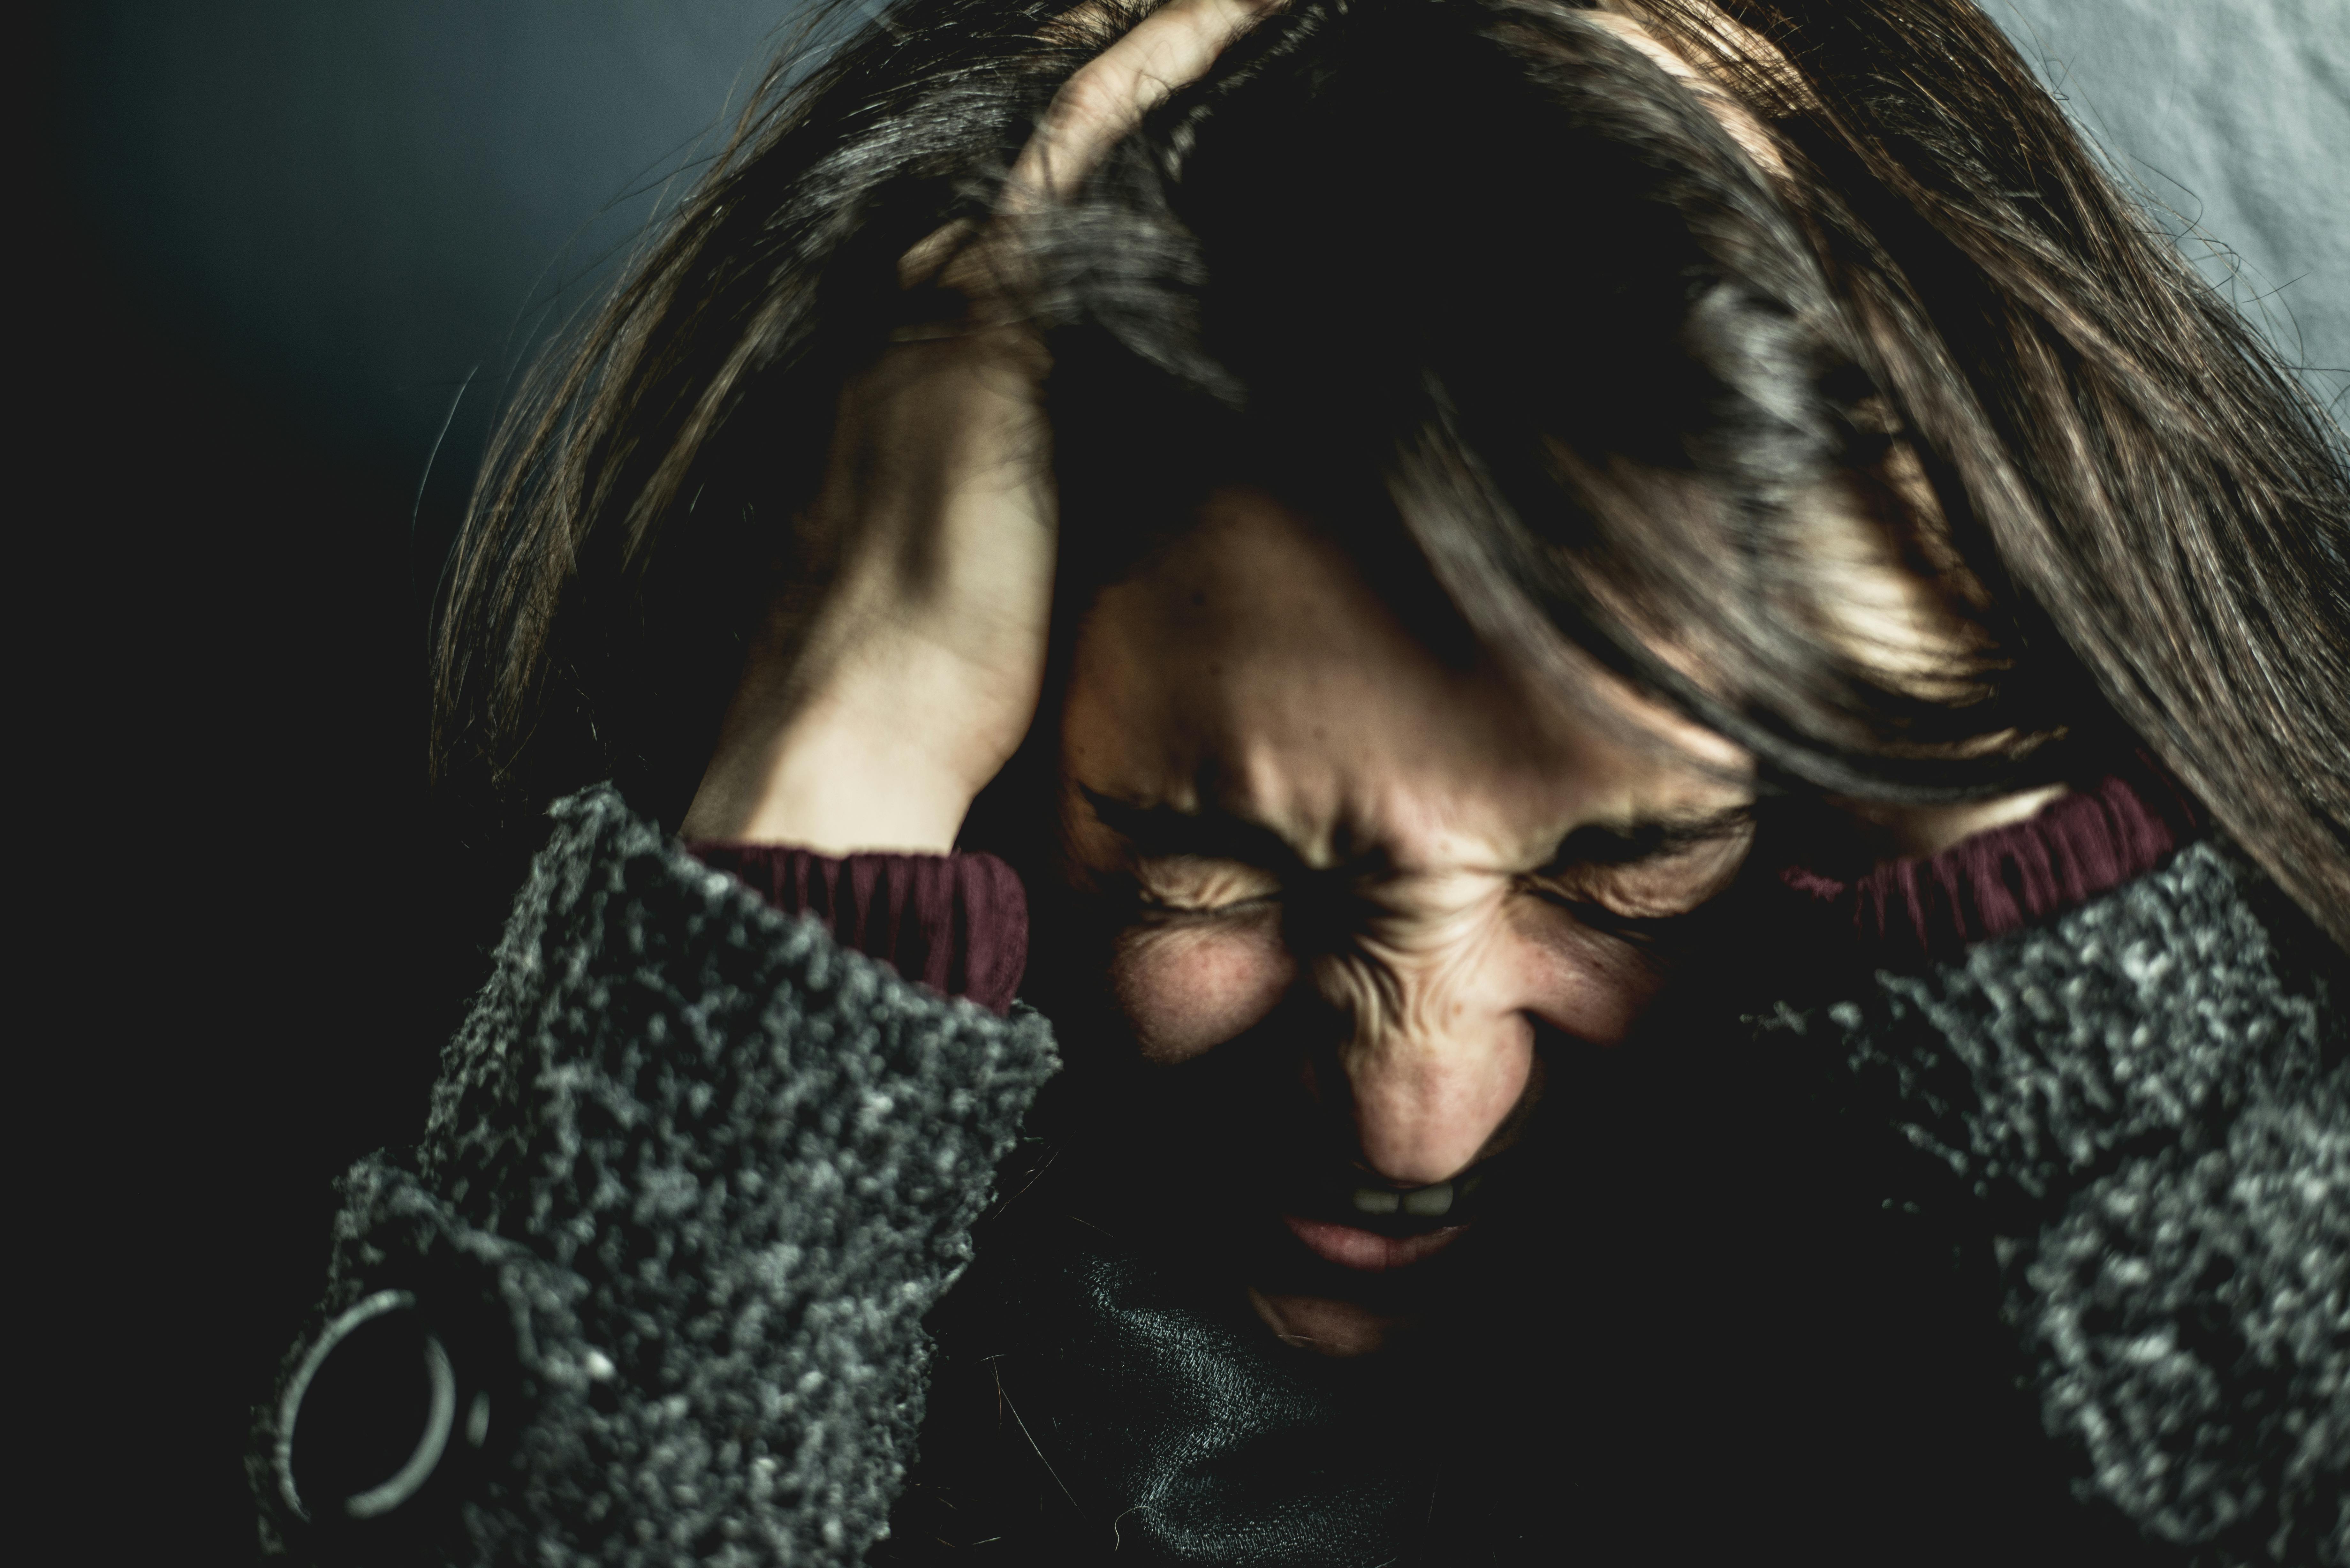 A scared woman holding her head | Source: Pexels